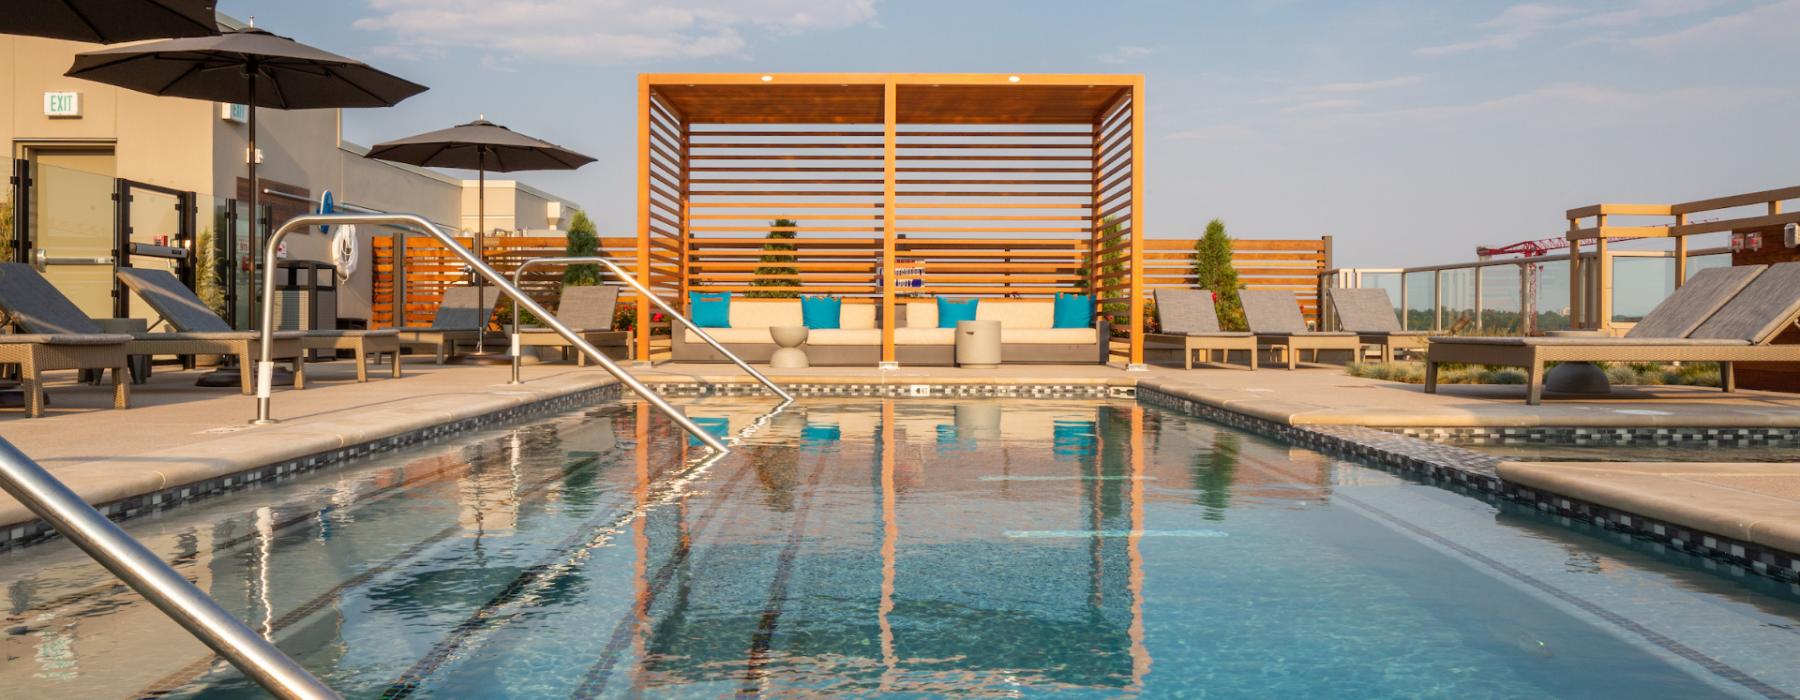 Four-seasons heated pool with daybeds and cabanas